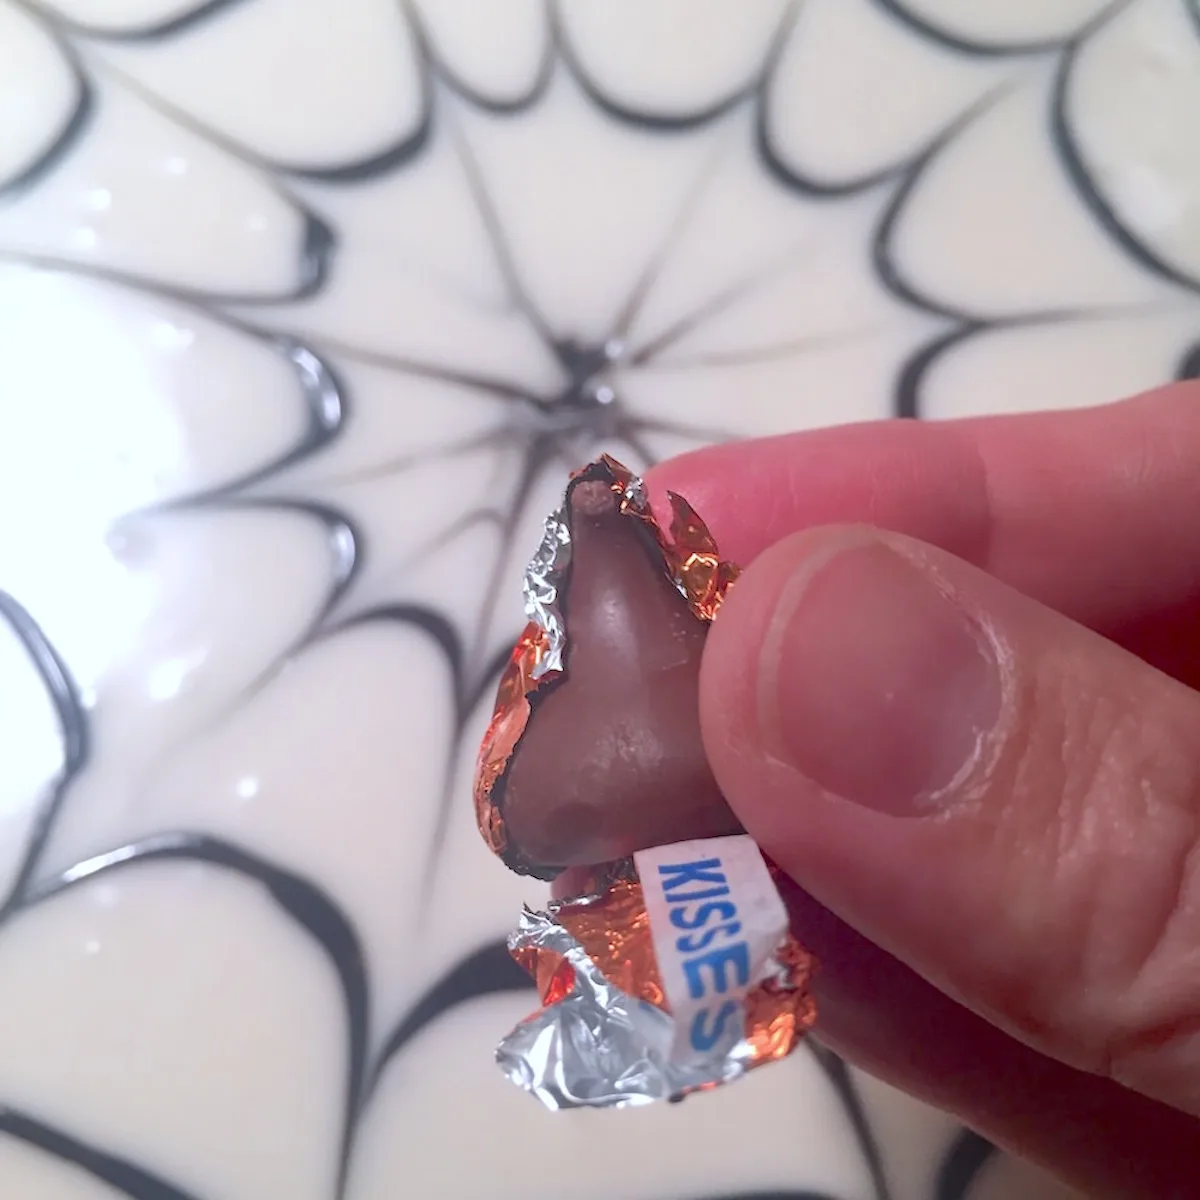 Unwrapping a Hershey's kiss